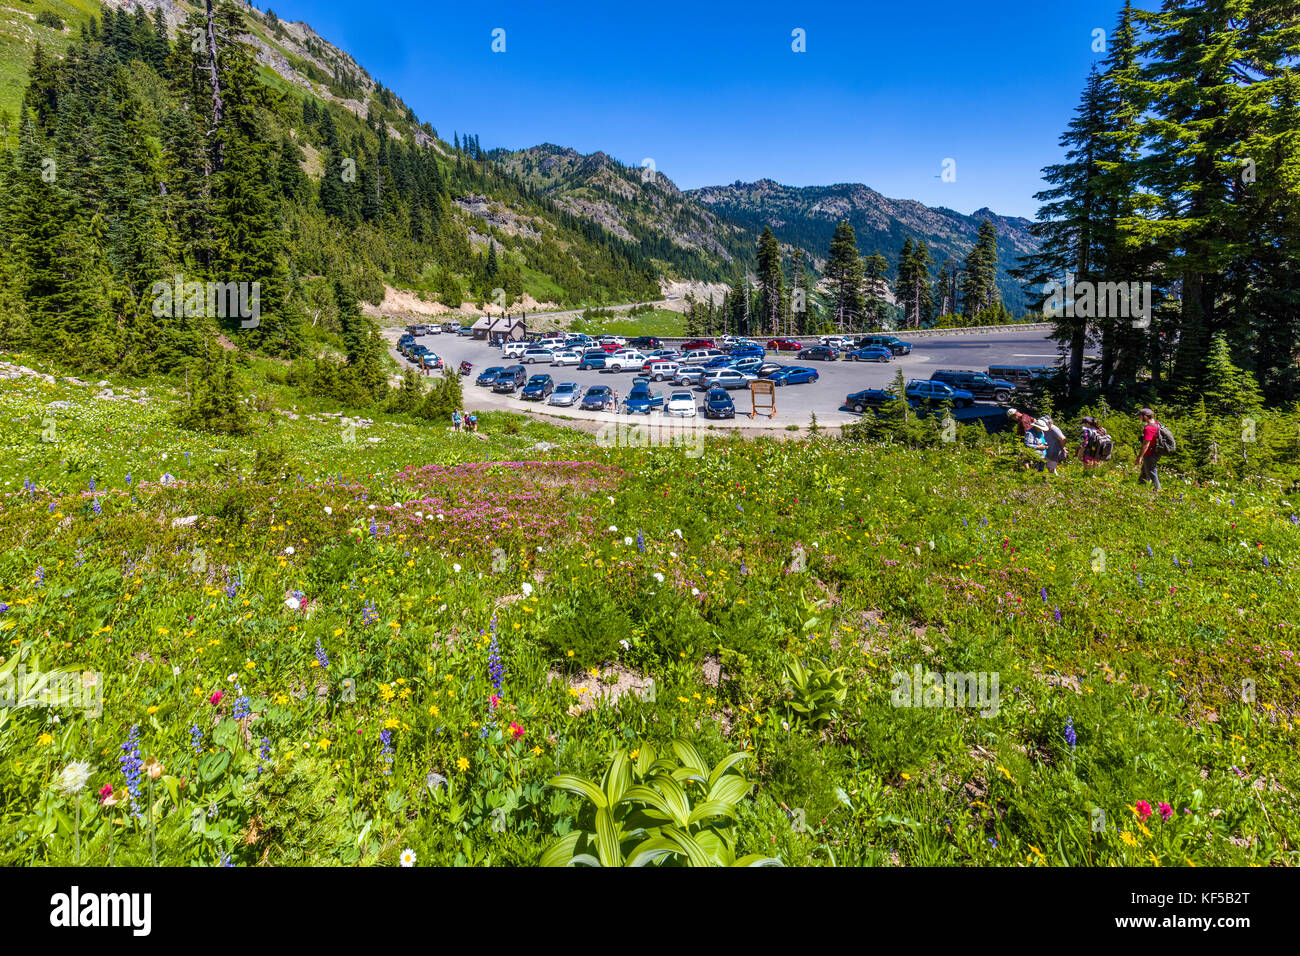 Parking area in Chinook Pass on the Mather Memorial Parkway in Mount Rainier National Park Washington during summer wildflower season Stock Photo